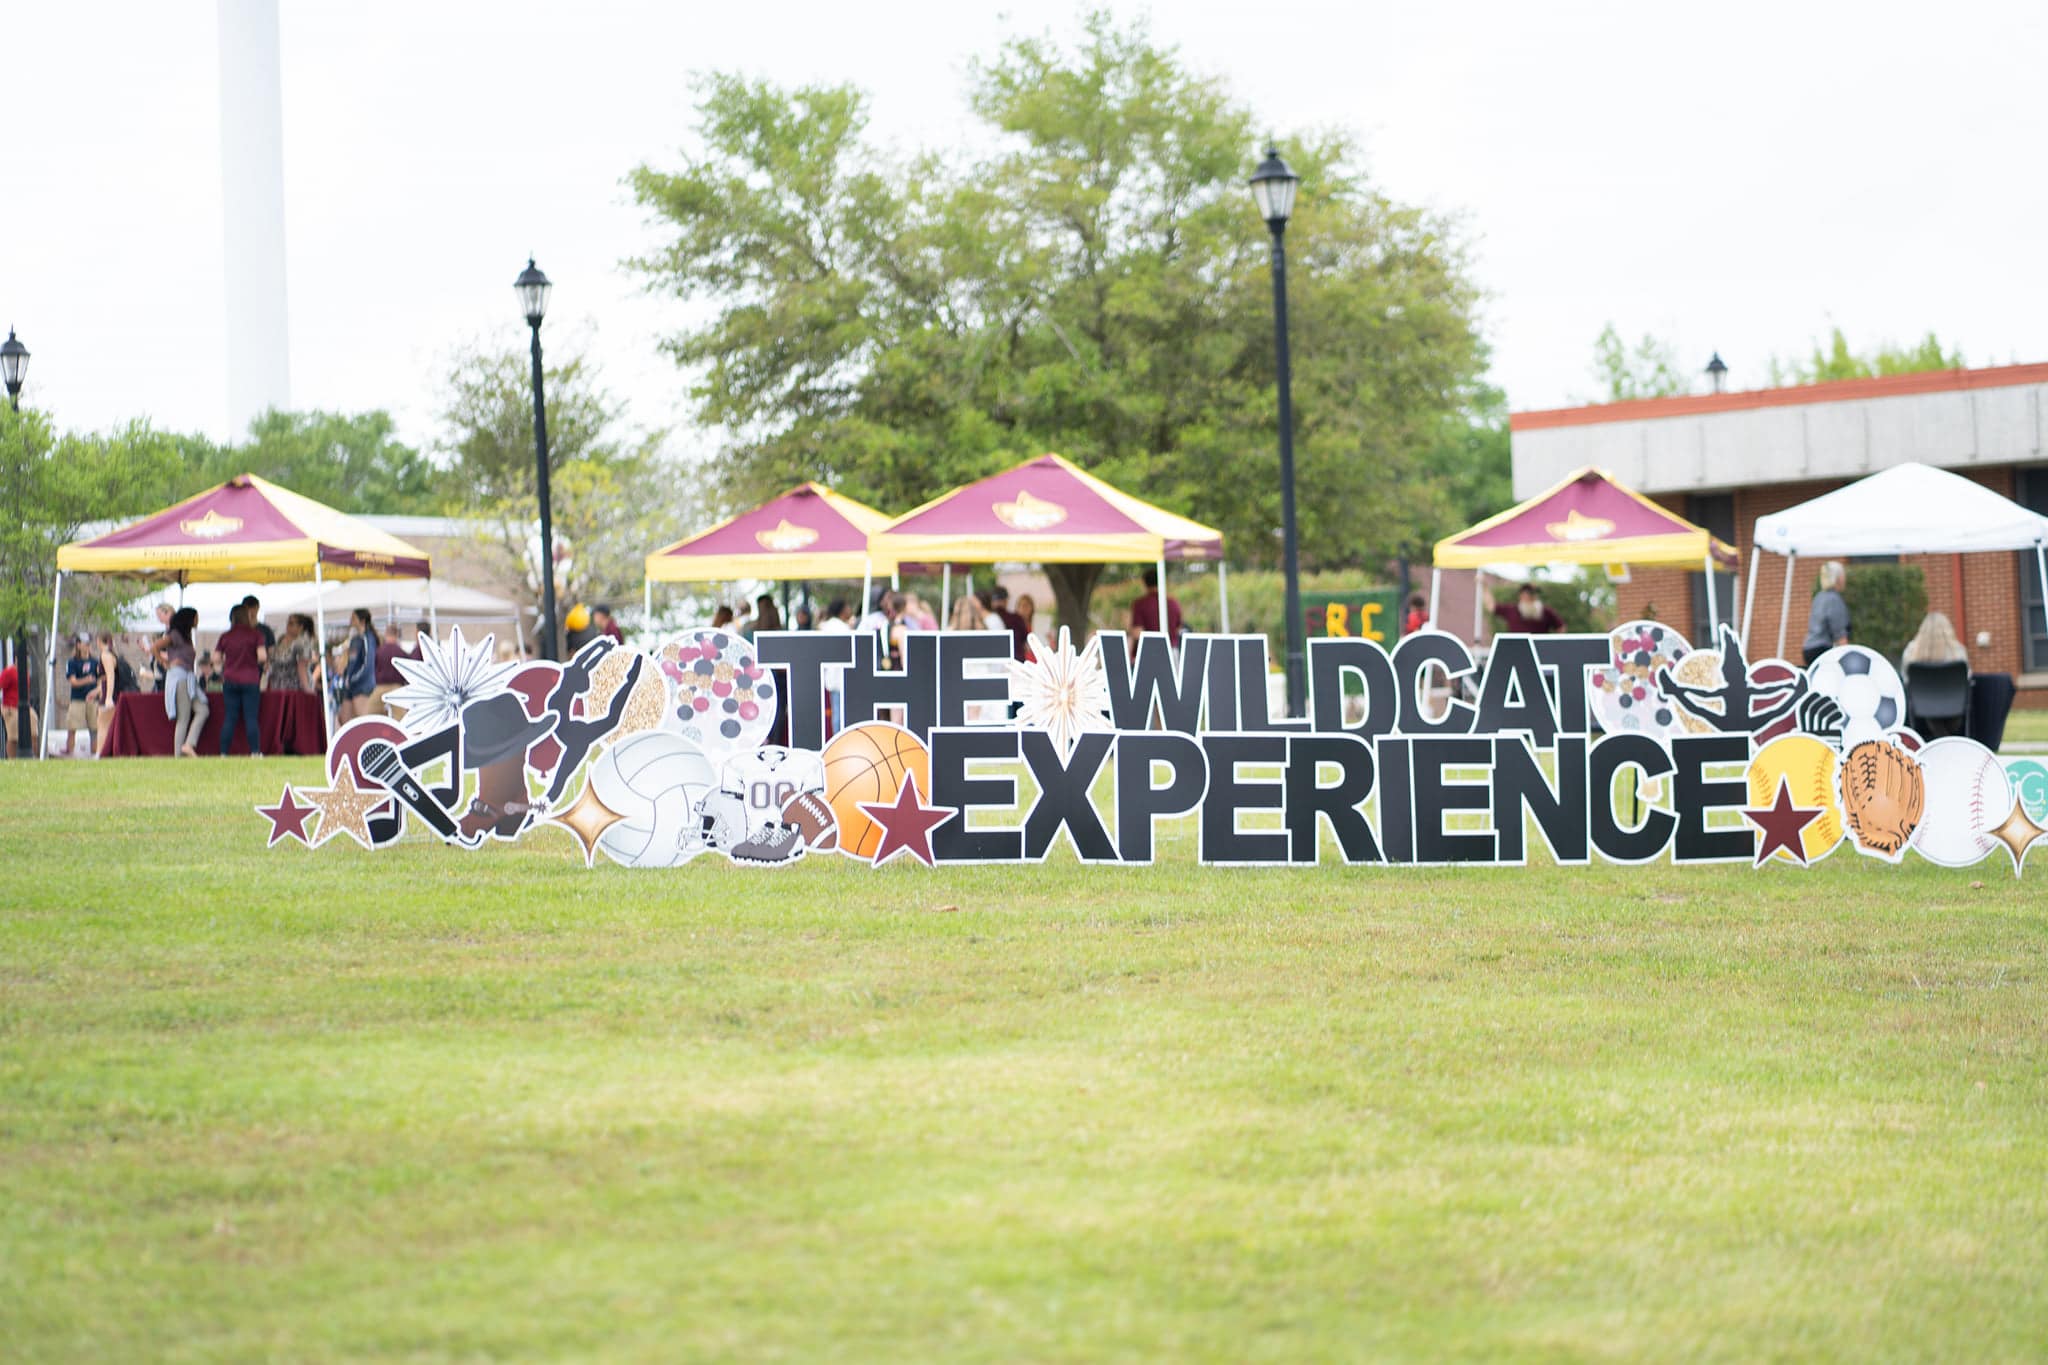 Sign sits across green space with booth tents and people in the background. It says Wildcat Experience with different graphical elements surrounding the words